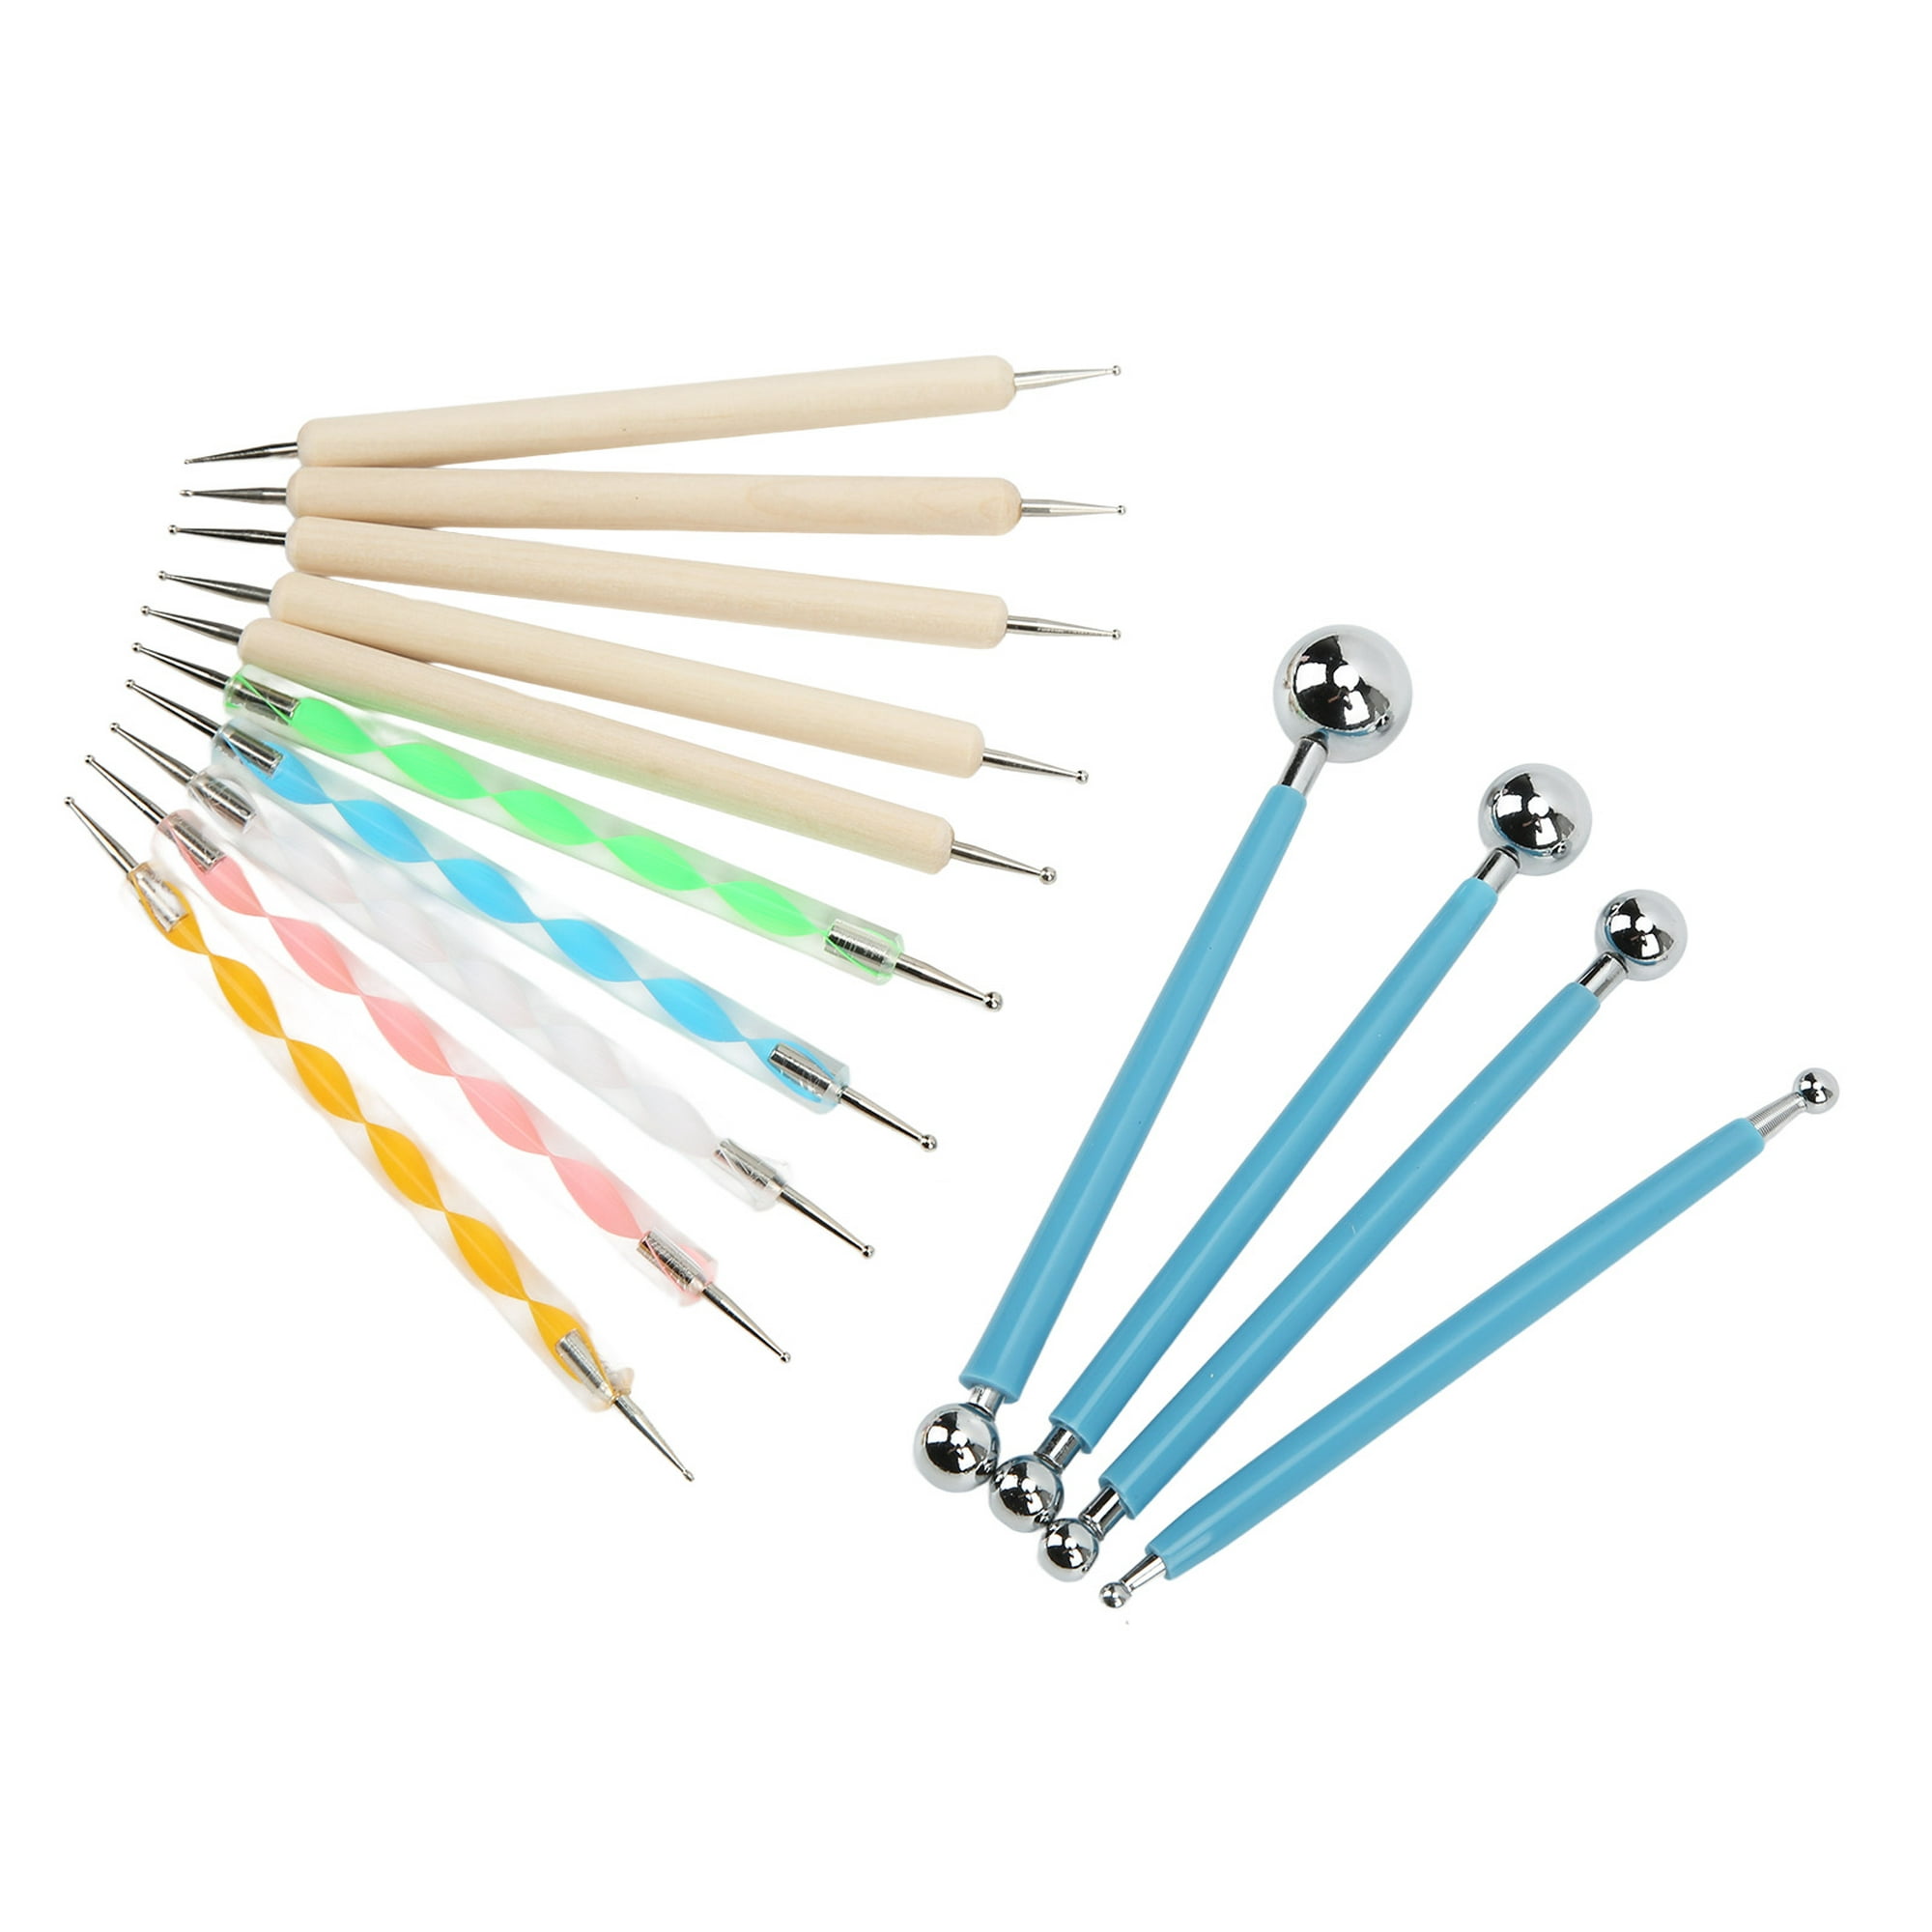 Meuxan 13 Piece Ball Stylus Dotting Tools for Rock Painting, Clay